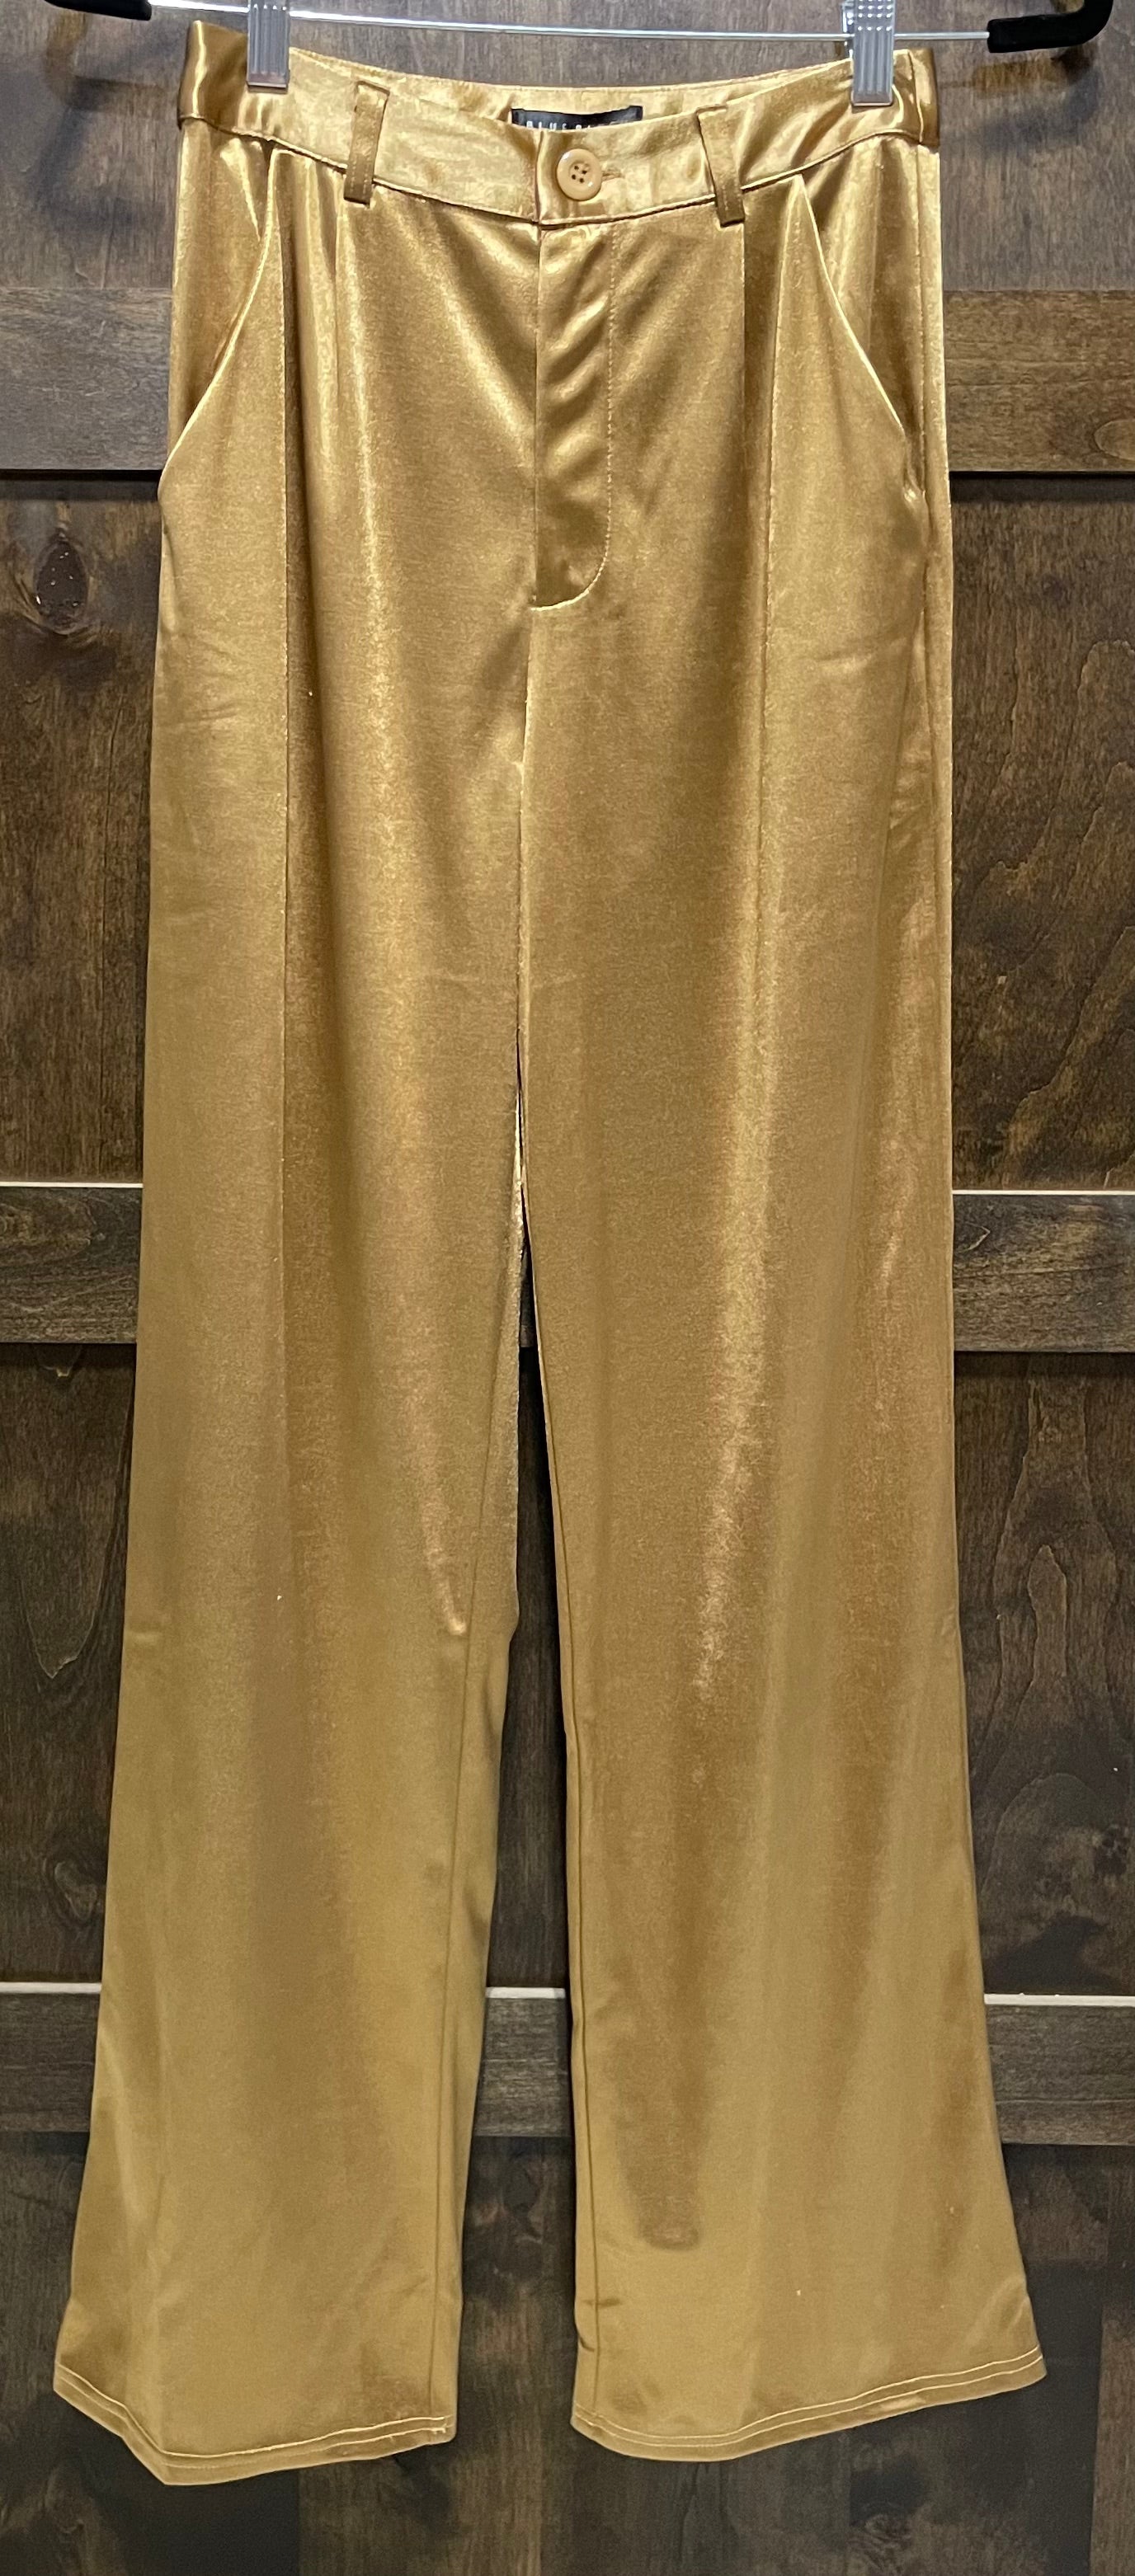 Golden Honey Bee Satin Crop Tank and Wide Leg Pants by Blue Blush